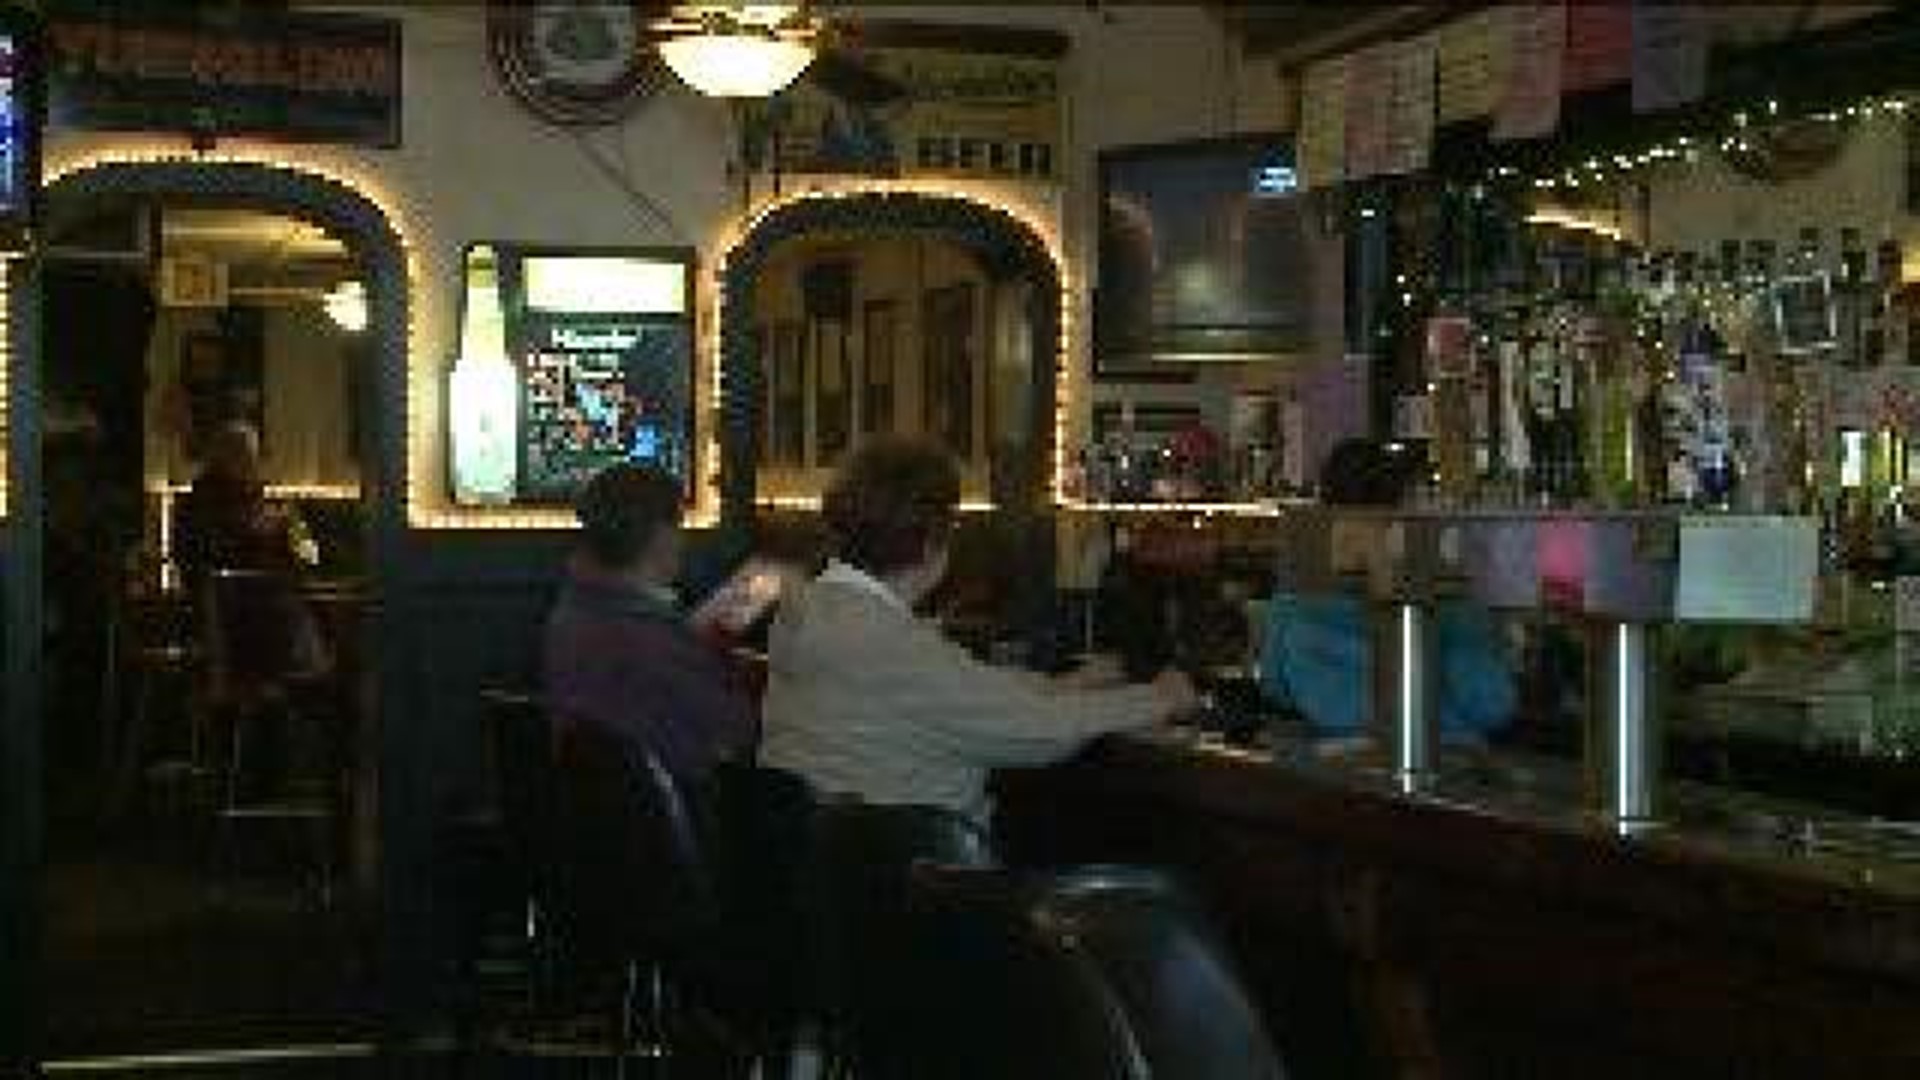 Lawmakers OK Small Games of Chance At Bars